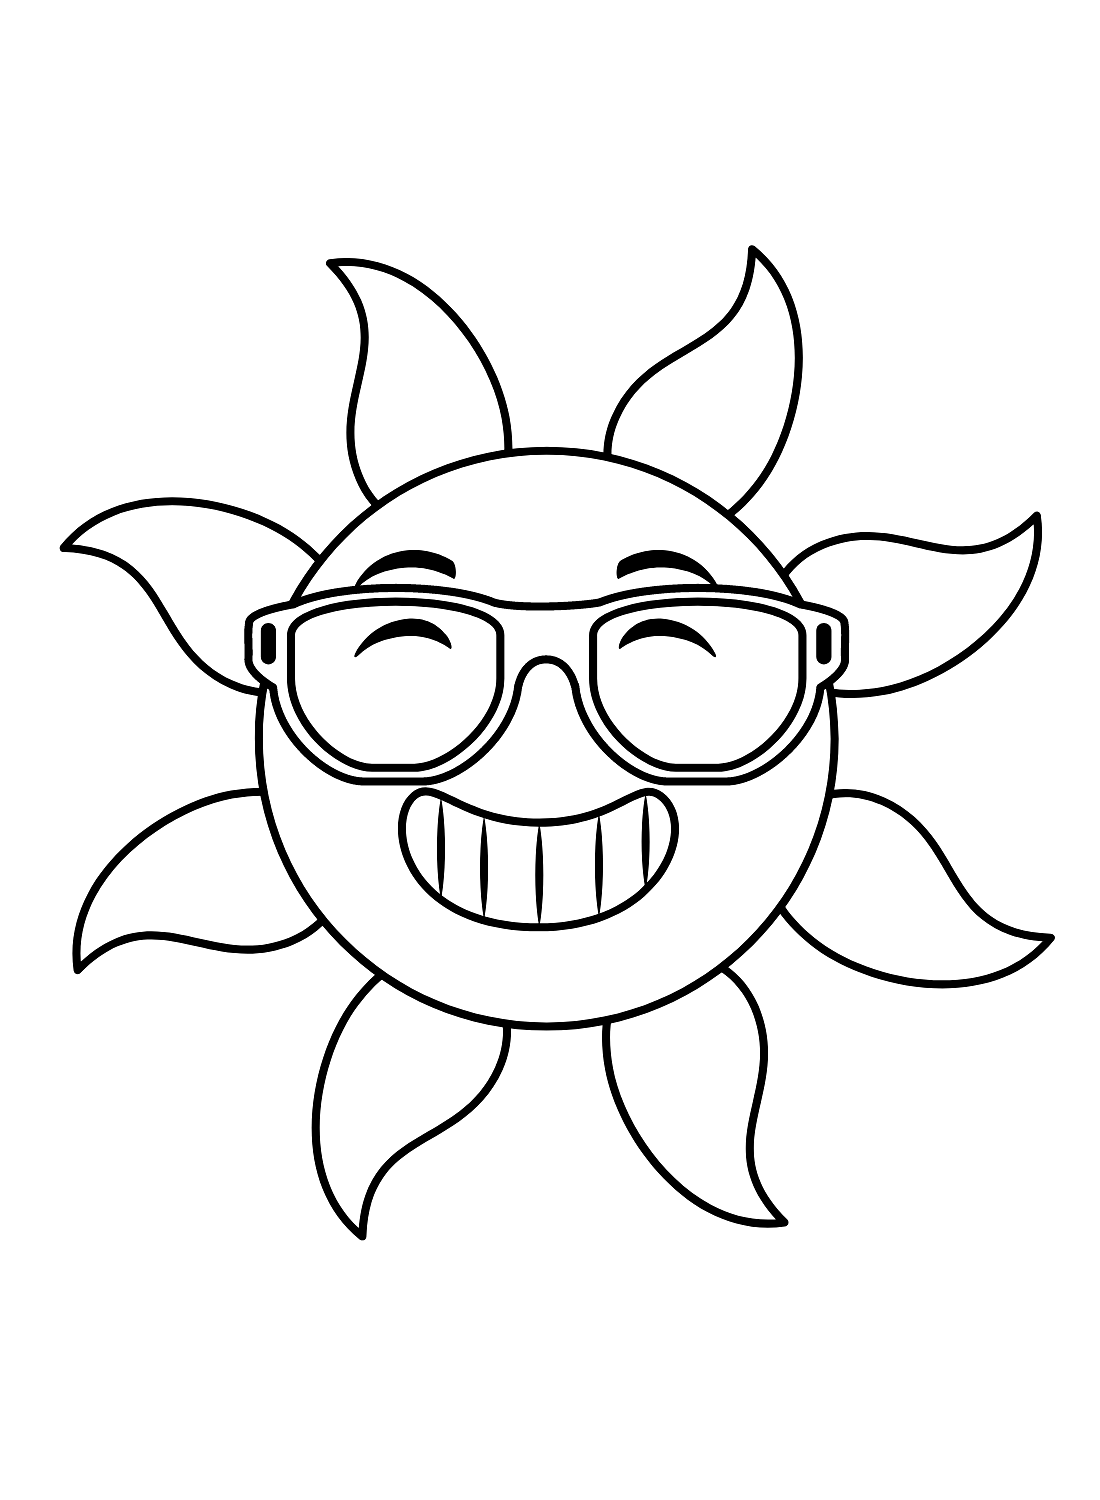 Sun with Sunglasses Coloring Page